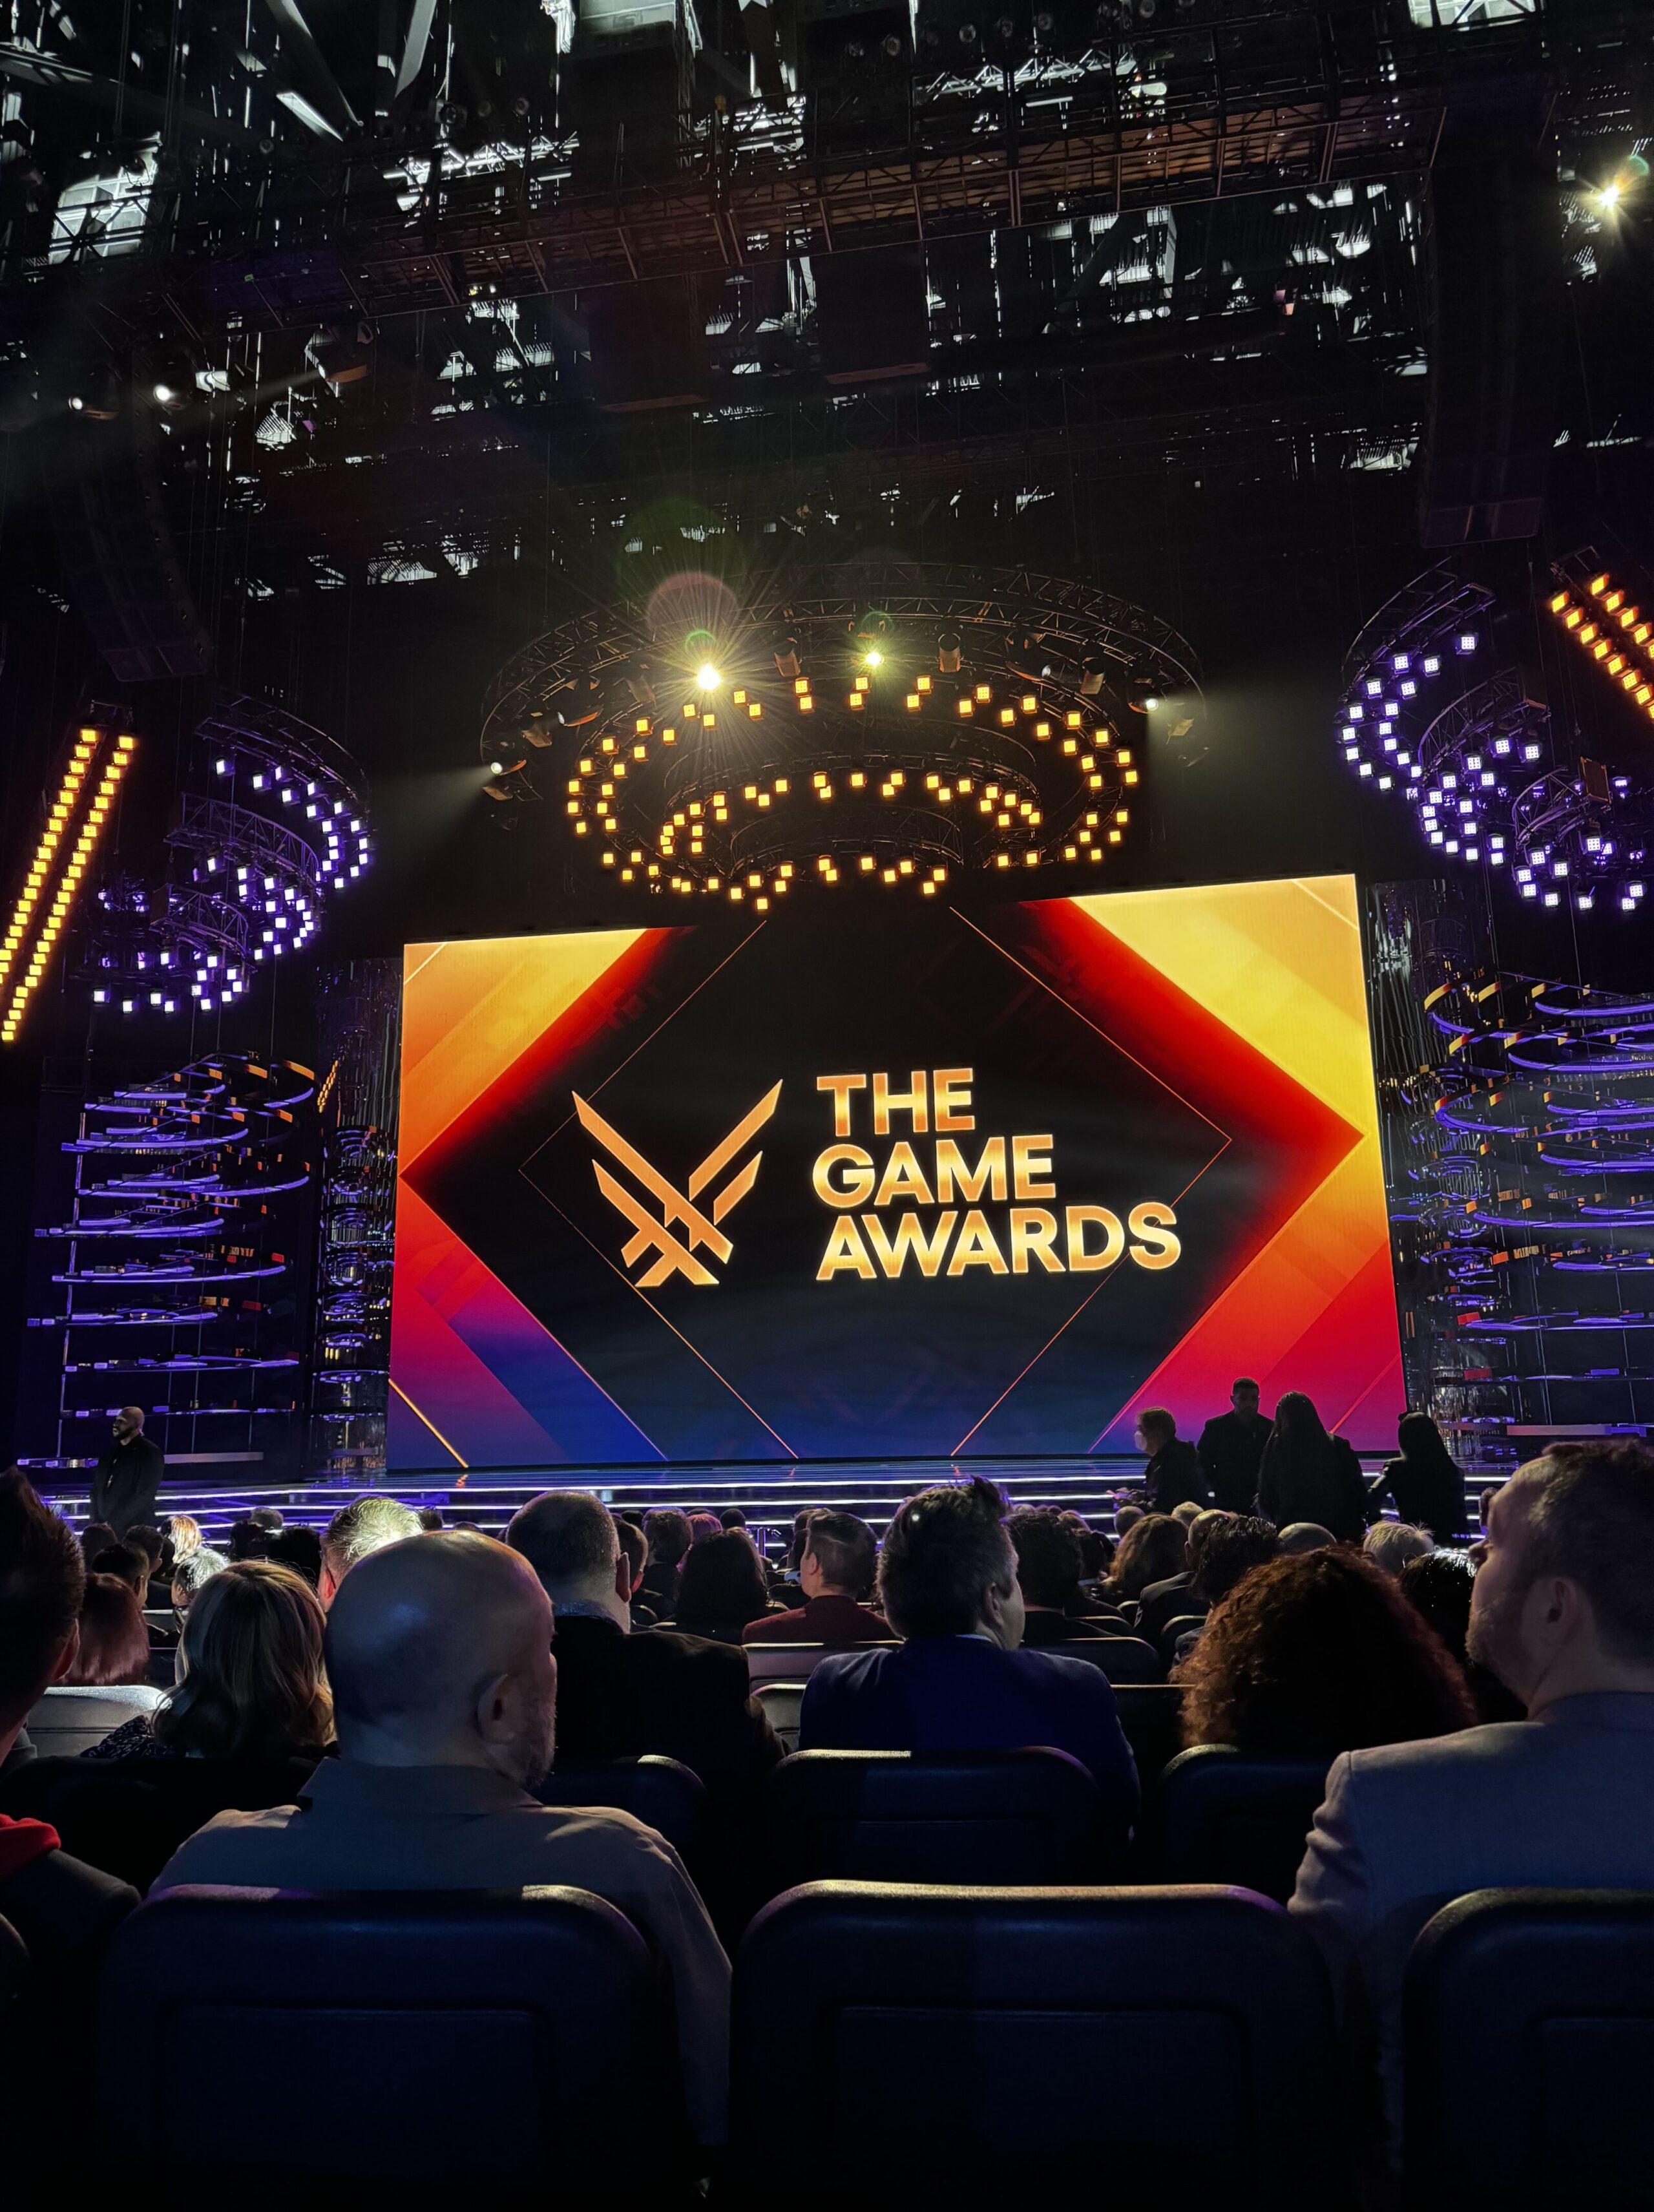 Anyone want free tickets to The Game Awards? : r/gaming